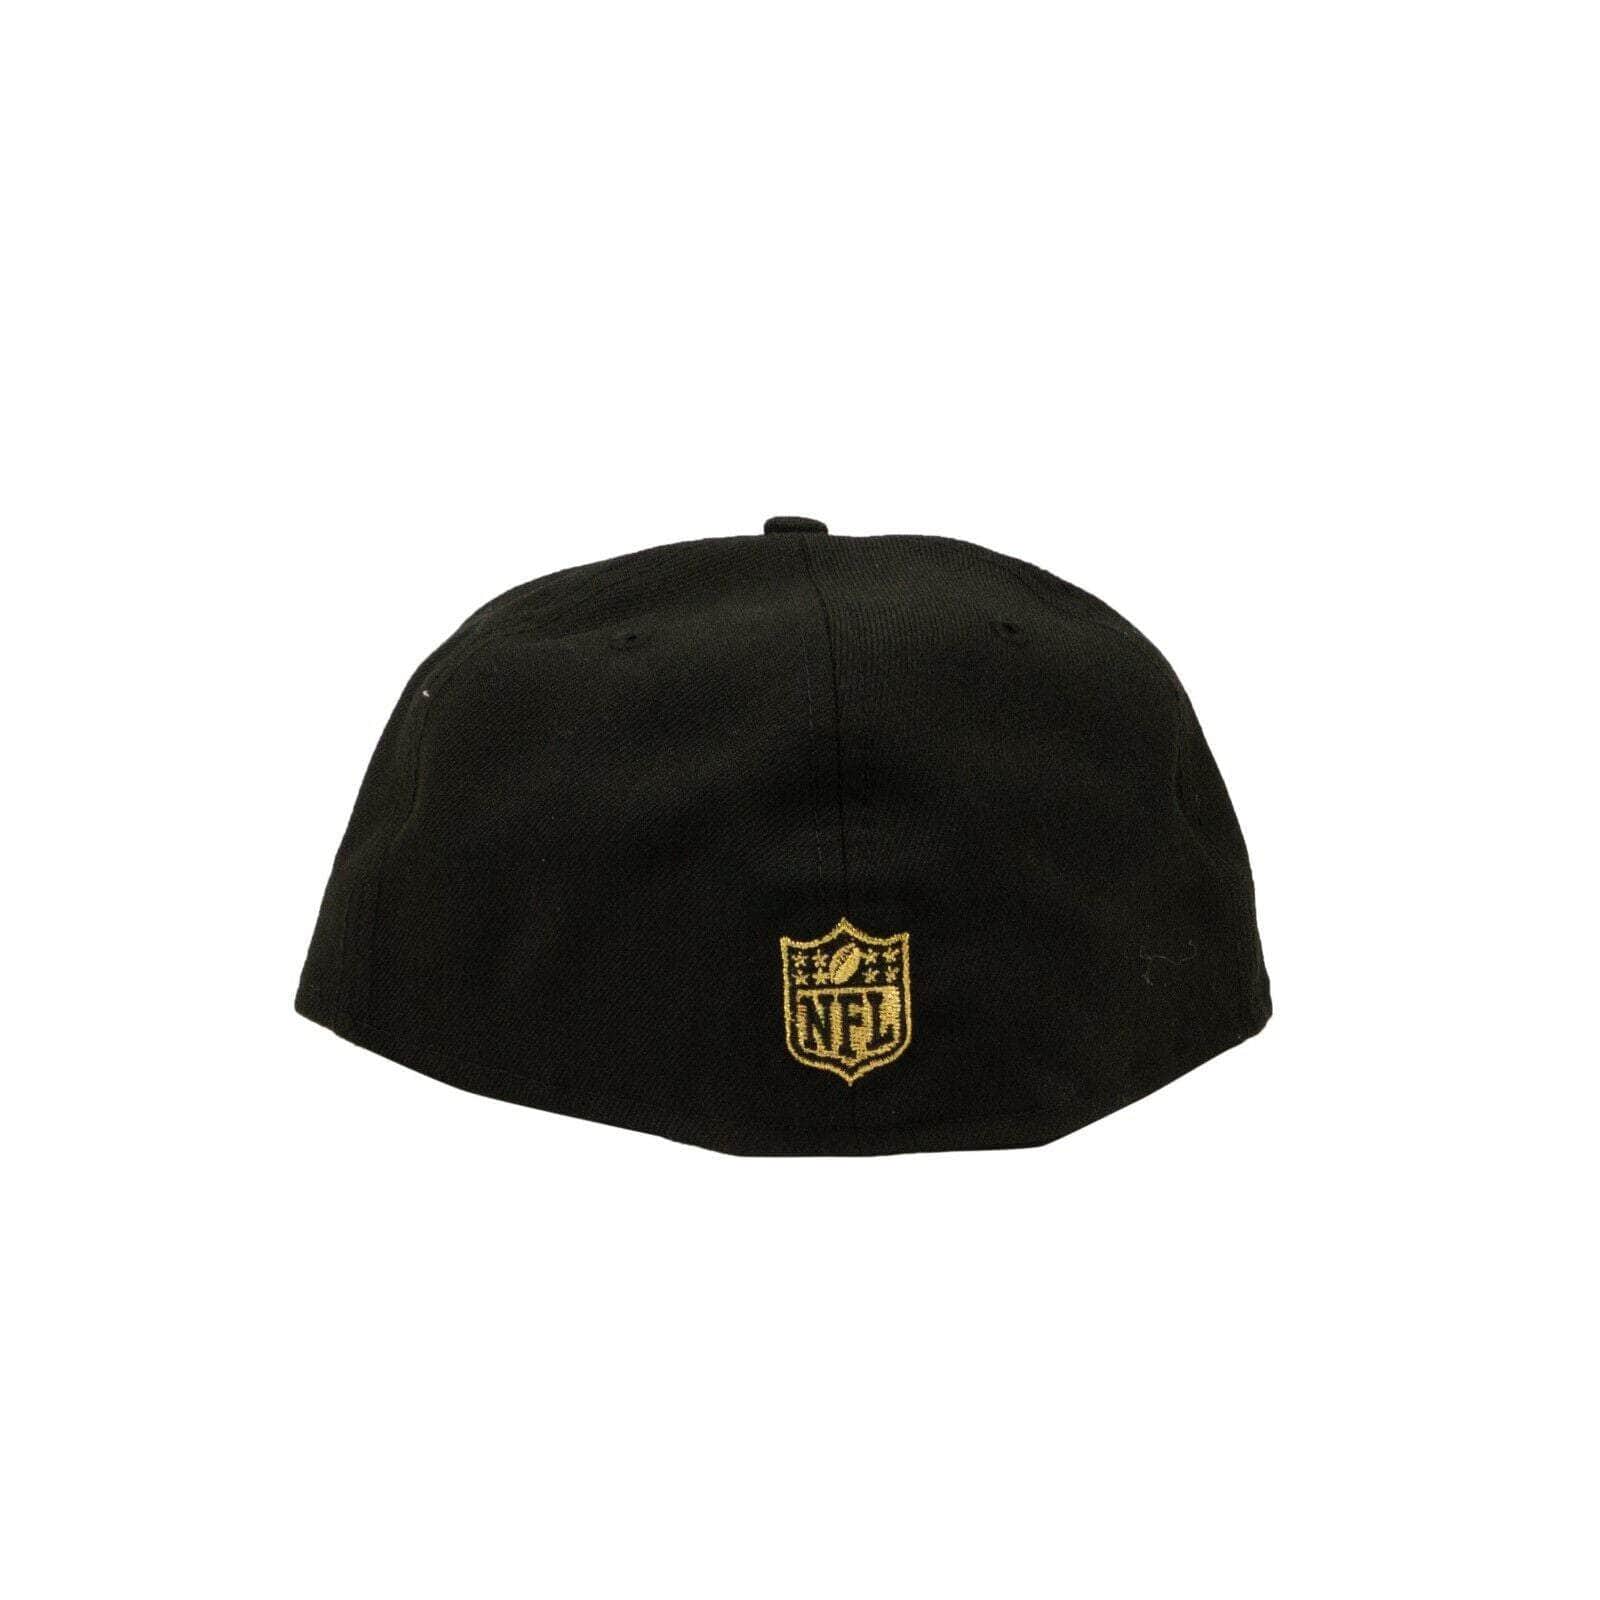 Just Don channelenable-all, chicmi, couponcollection, gender-mens, just-don, main-accessories, mens-shoes, size-7_3-4, under-250 7_3-4 Black 59 Fiffty New Orleans Saints Cap JSD-XACC-0001/7_3-4 JSD-XACC-0001/7_3-4